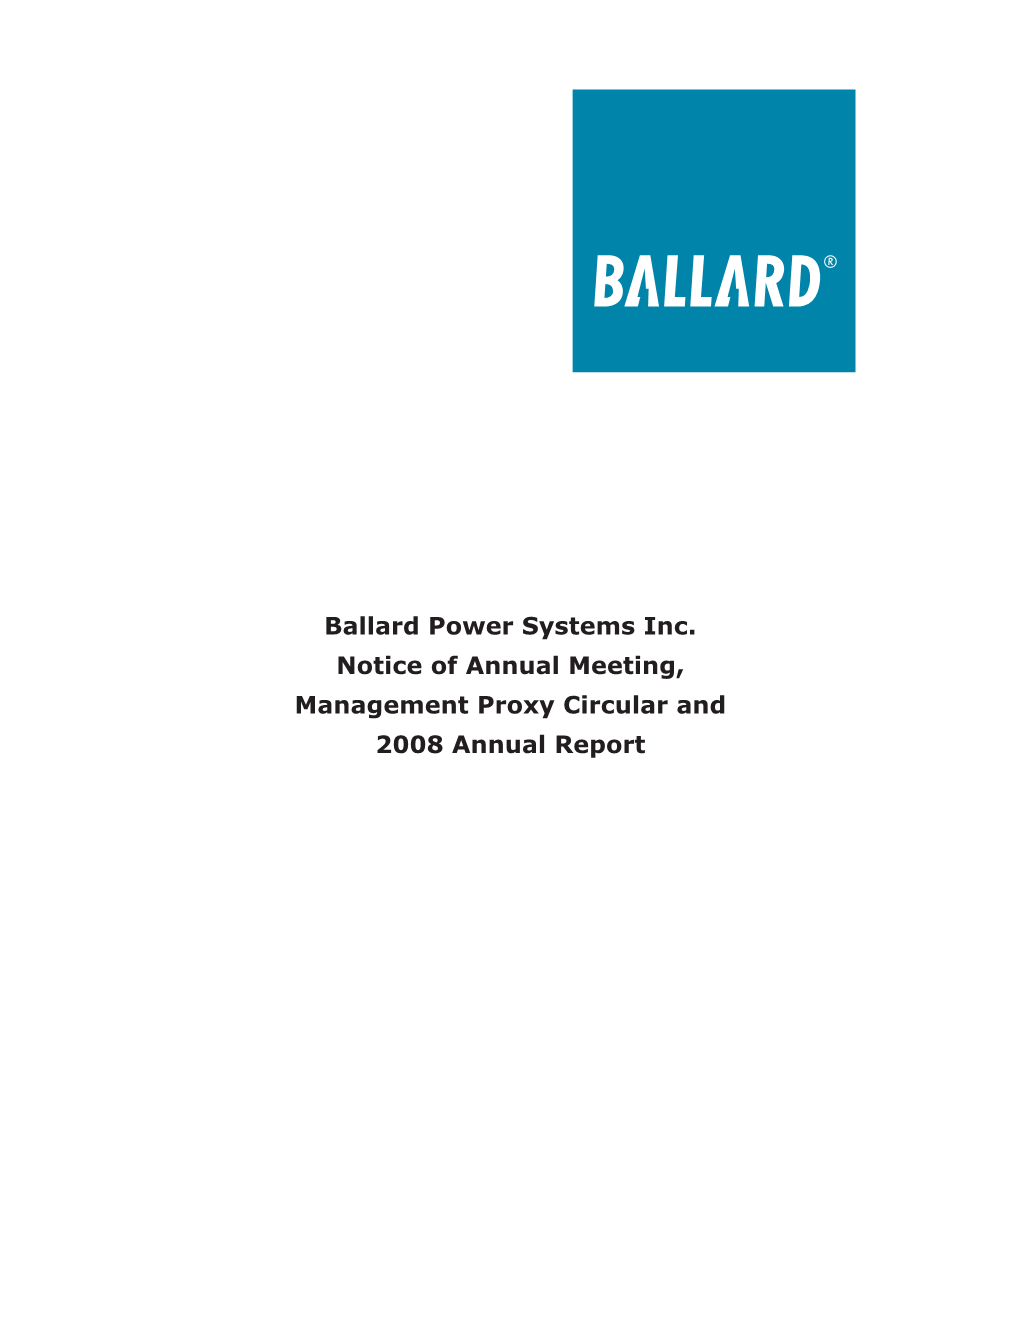 Ballard Power Systems Inc. Notice of Annual Meeting, Management Proxy Circular and 2008 Annual Report